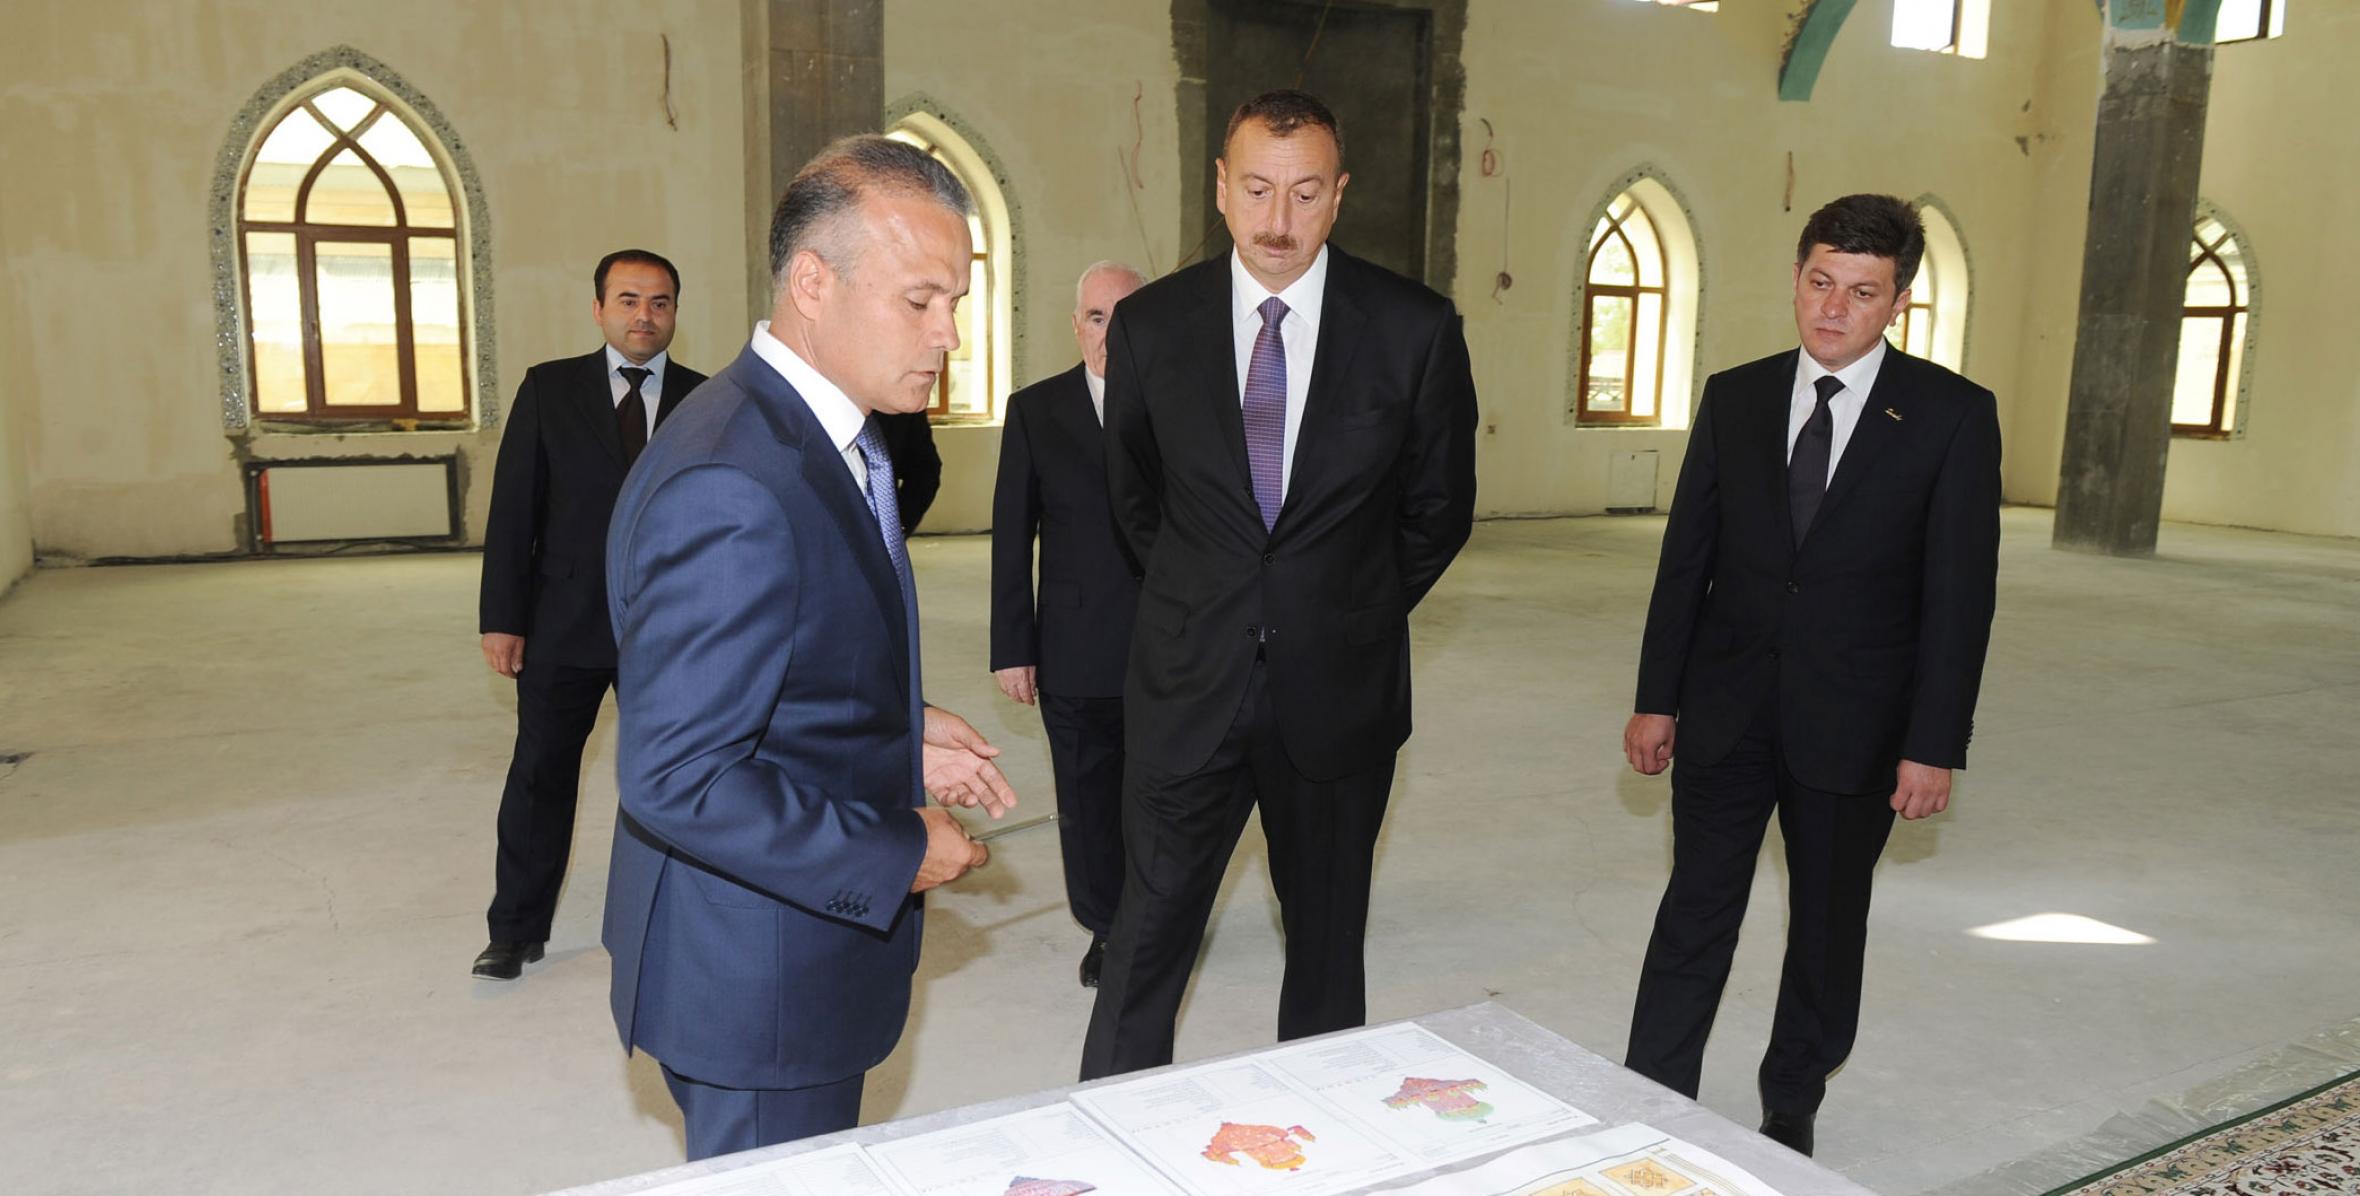 Ilham Aliyev reviewed the finishing work in the construction of a new building of the Gabala city mosque